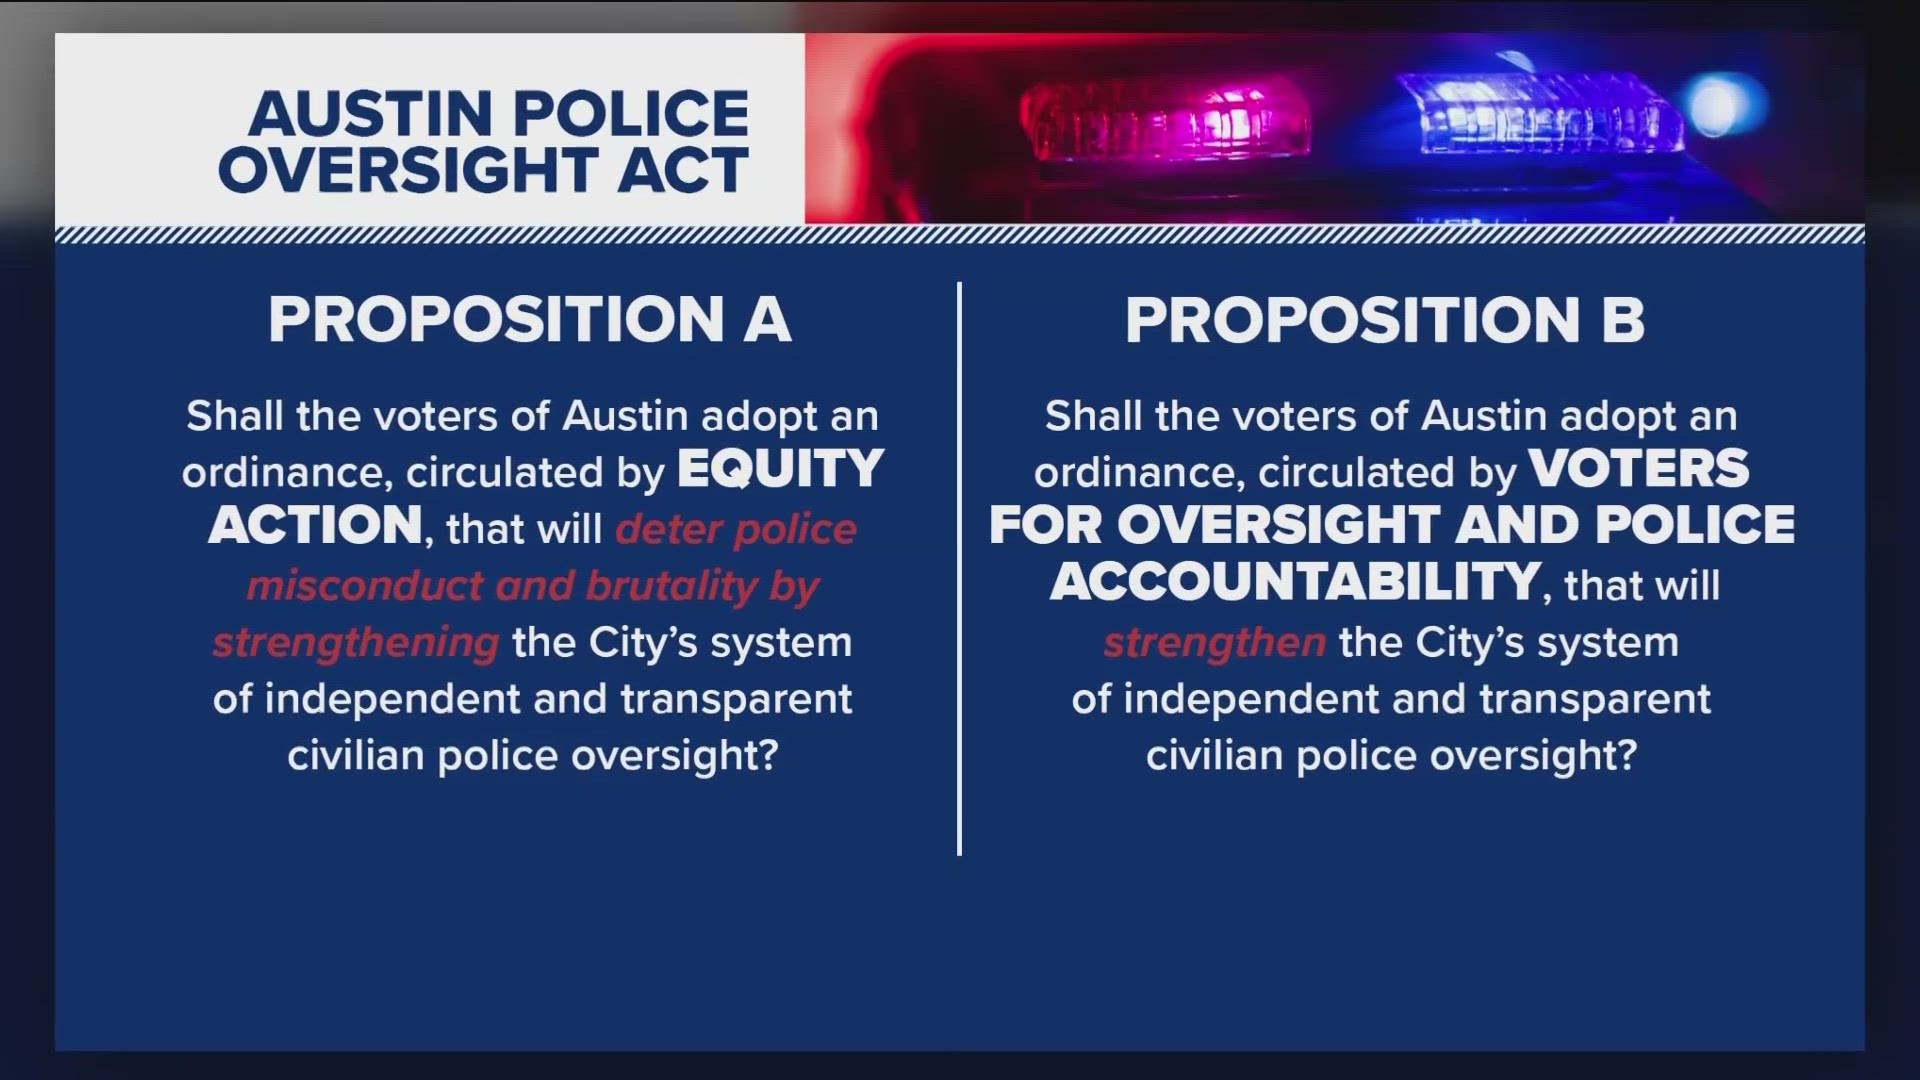 Austin voters will see two very similar items on the ballot that deal with police oversight. But the way they would work could be very different.